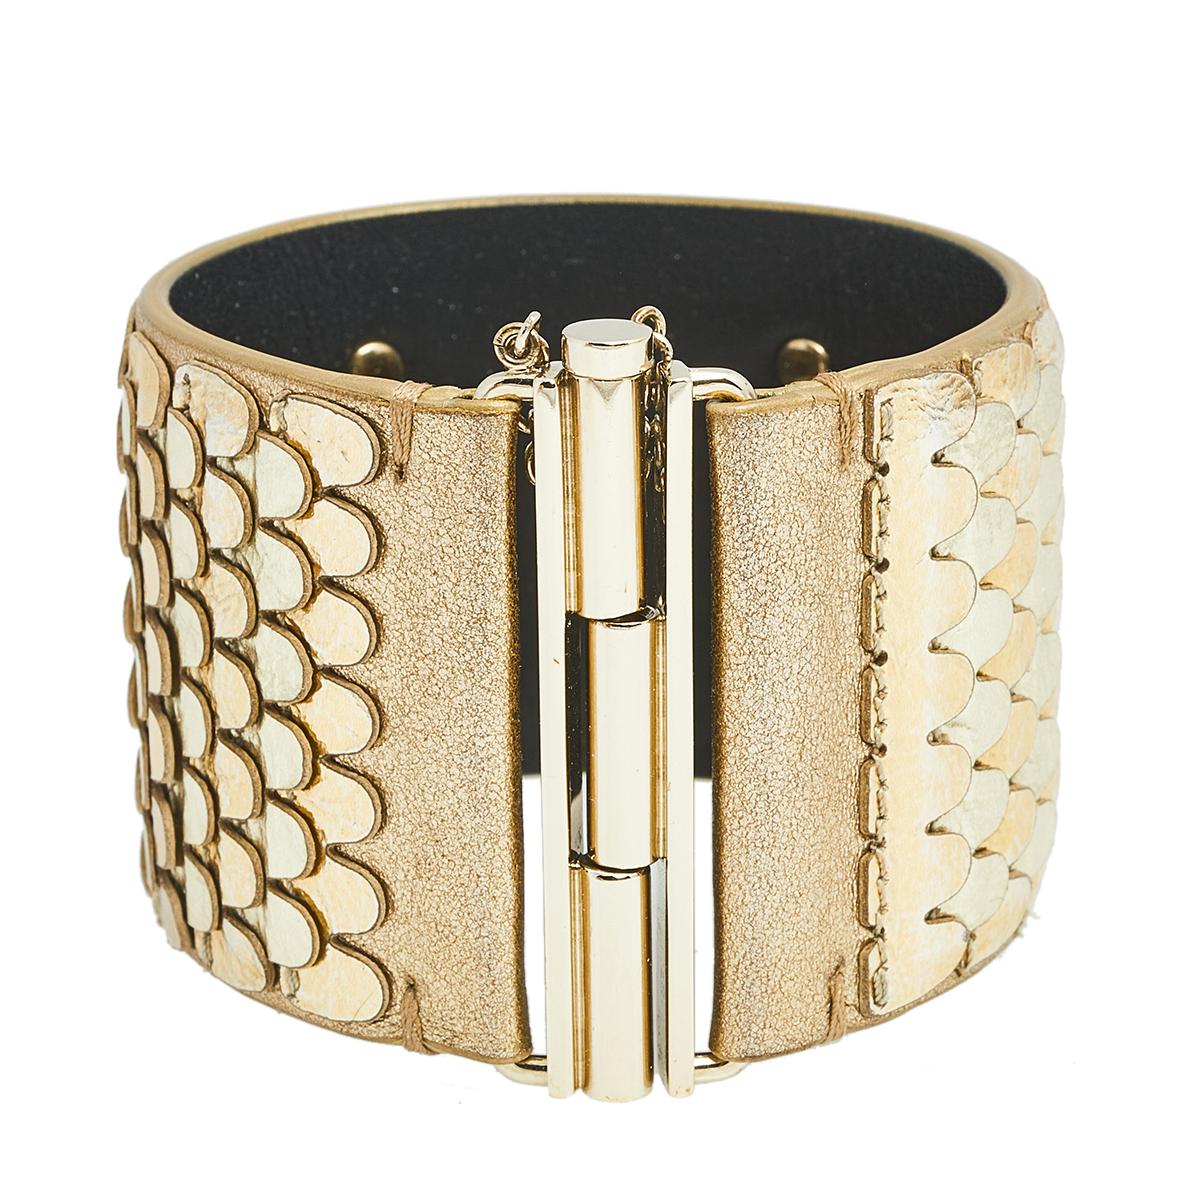 Created using gold-plated metal and metallic leather, this Chanel cuff bracelet has scale-like layers and the iconic CC logo. It's a signature Chanel style that you'll love wearing.